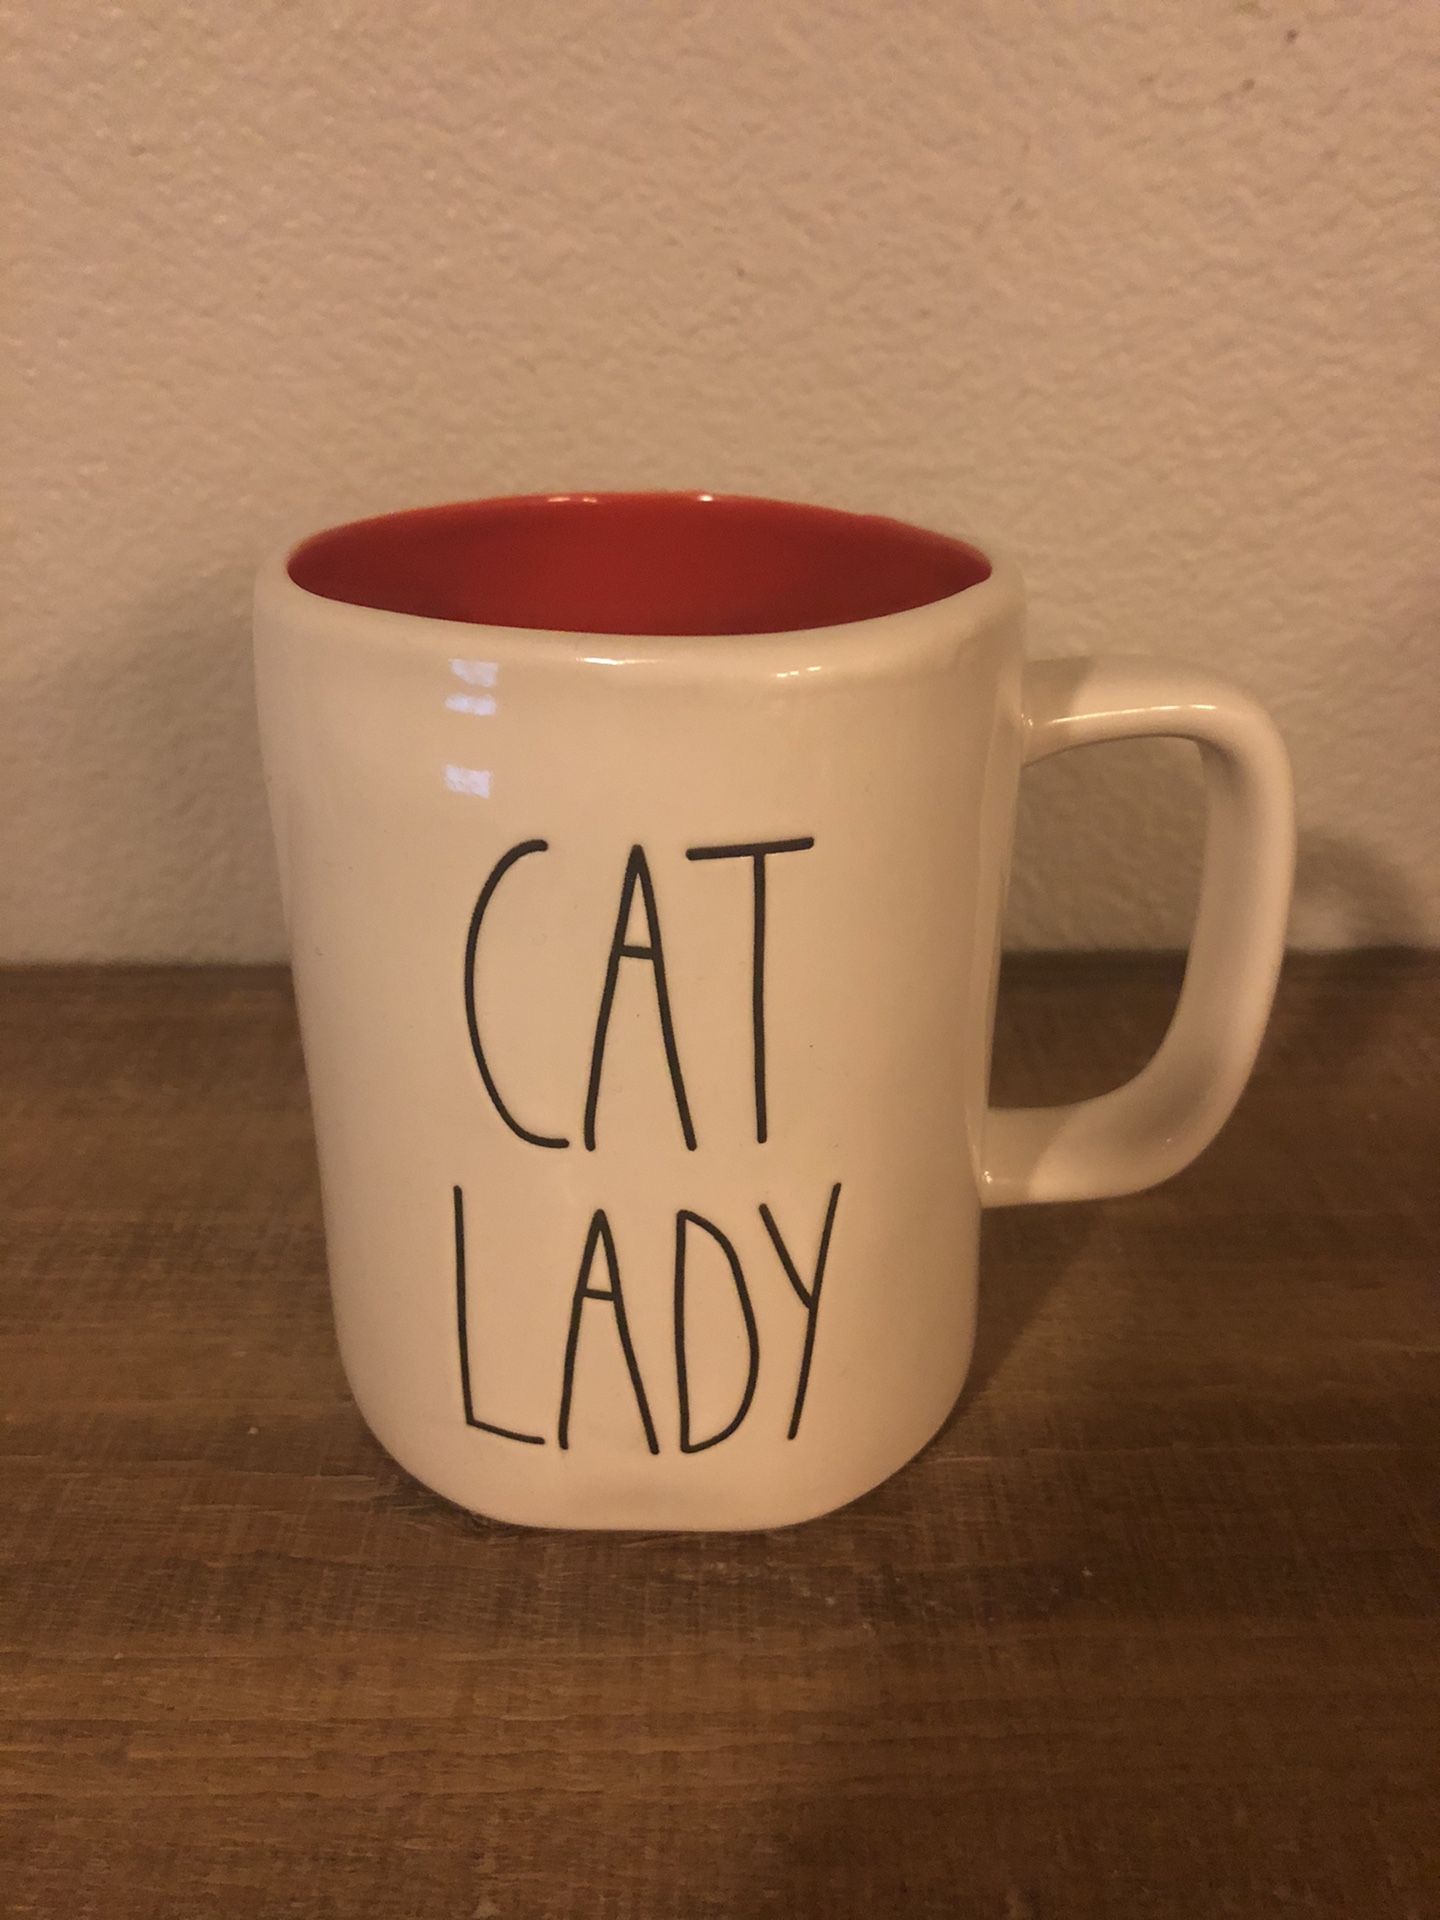 Rae Dunn Cat Lady Mug with Red Inside